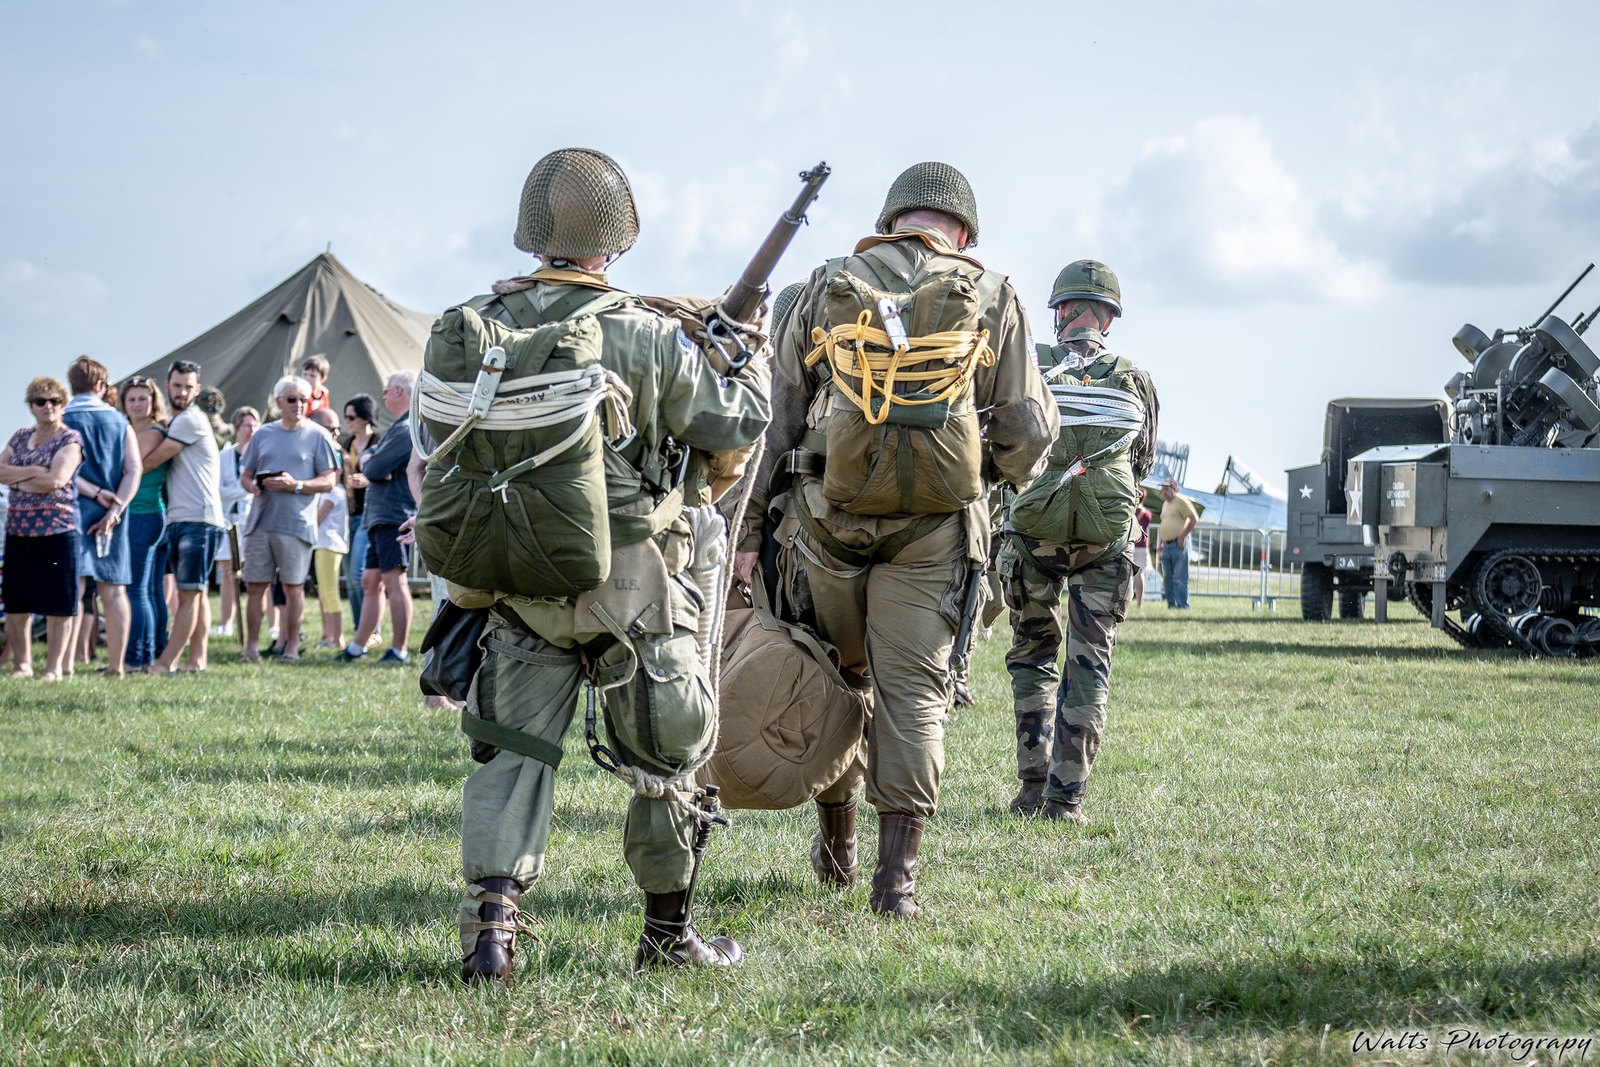 Airshow dedicated to the Allied landings. Normandy, France (continuation of the post on D-Day or D-Day) - , day d, Normandy, Normandy landings, Historical reconstruction, Airshow, France, Longpost